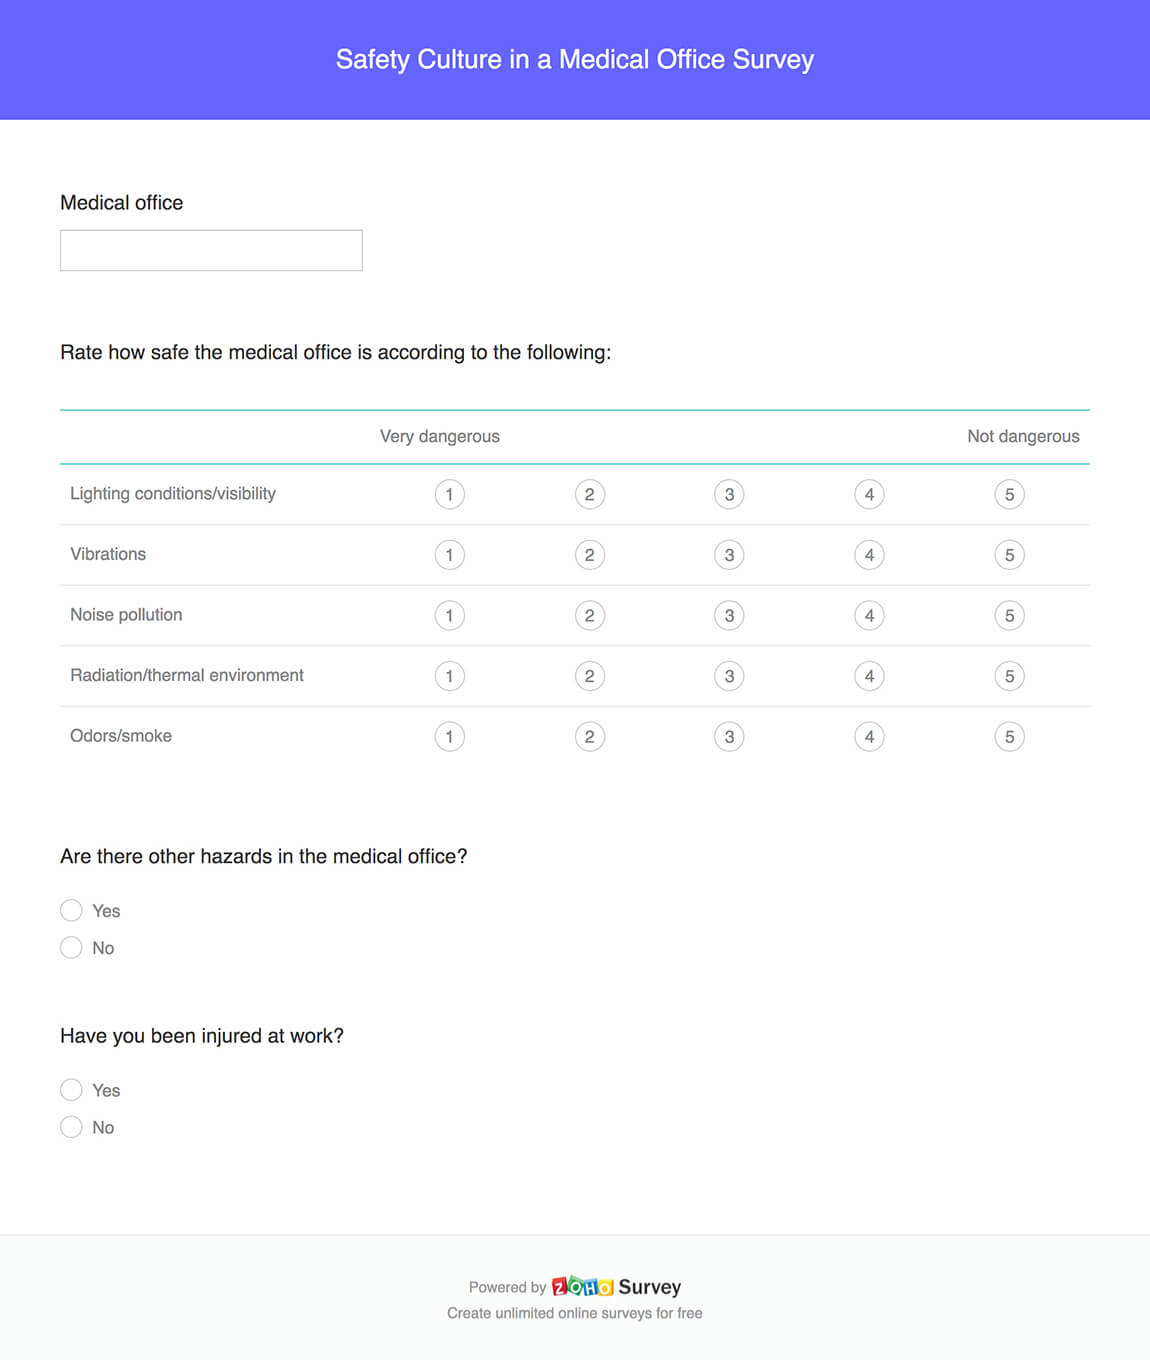 Safety culture in a medical office survey questionnaire template